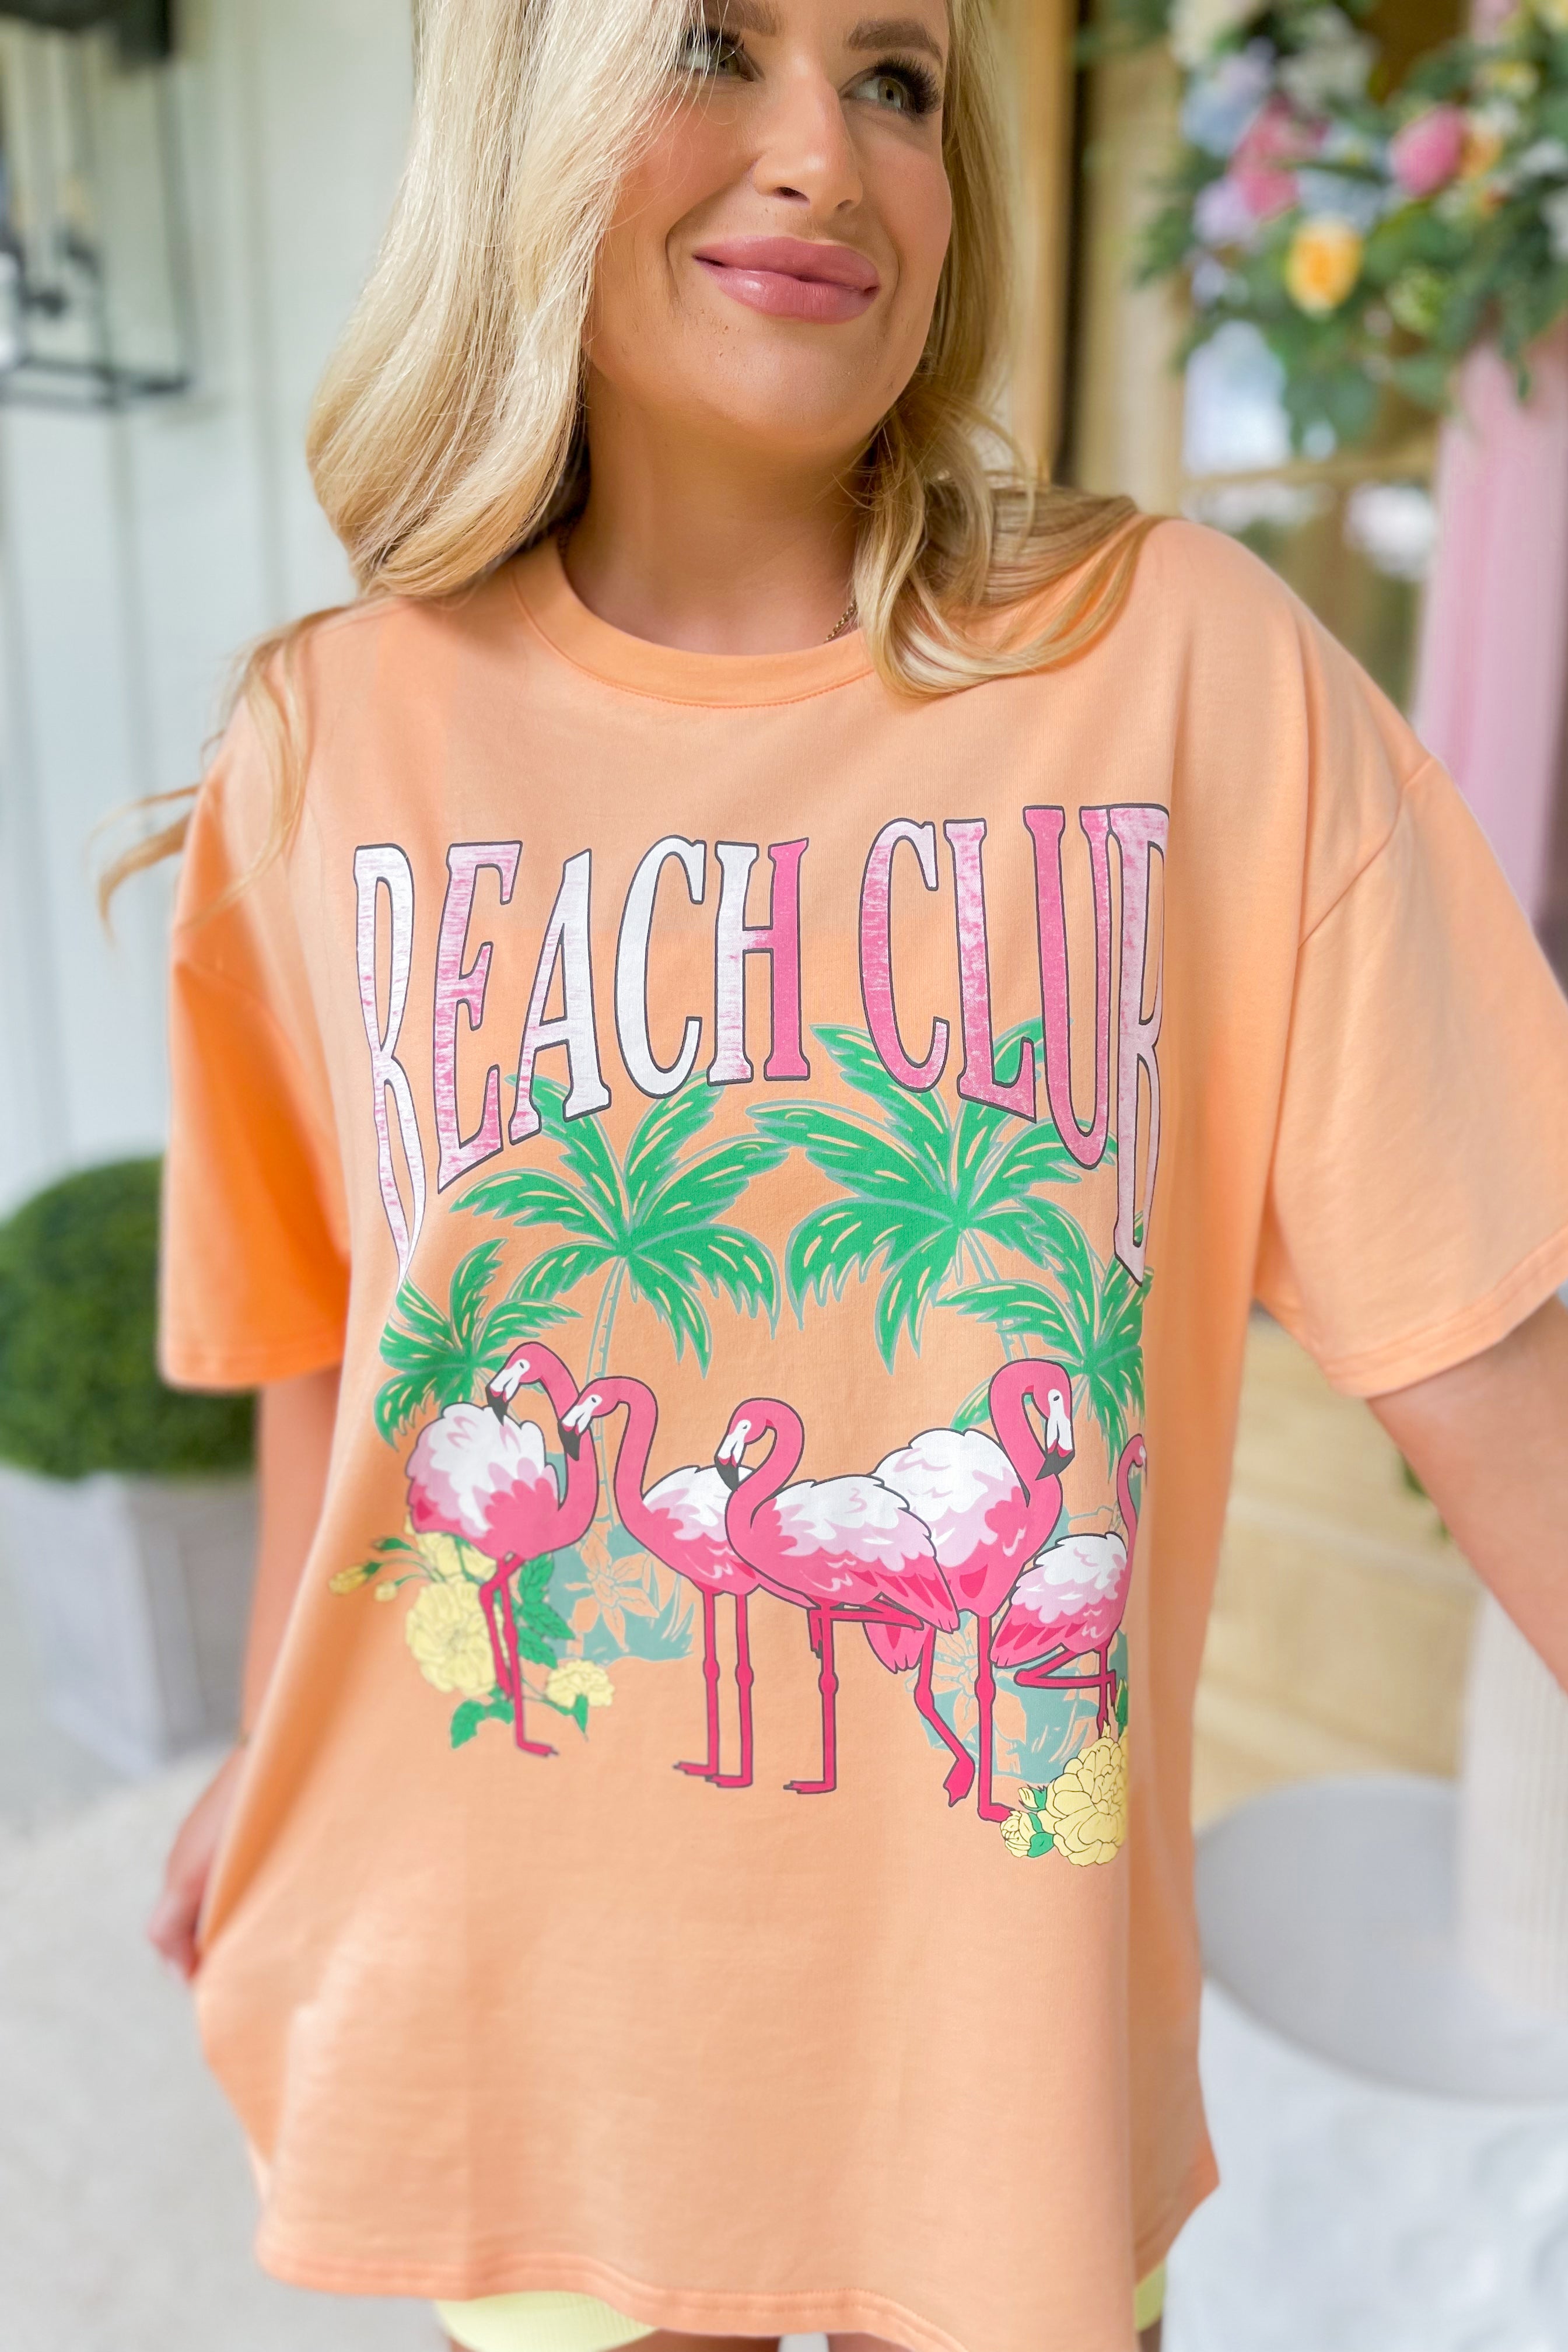 Beach Club Short Sleeve Graphic Tee Top - Be You Boutique